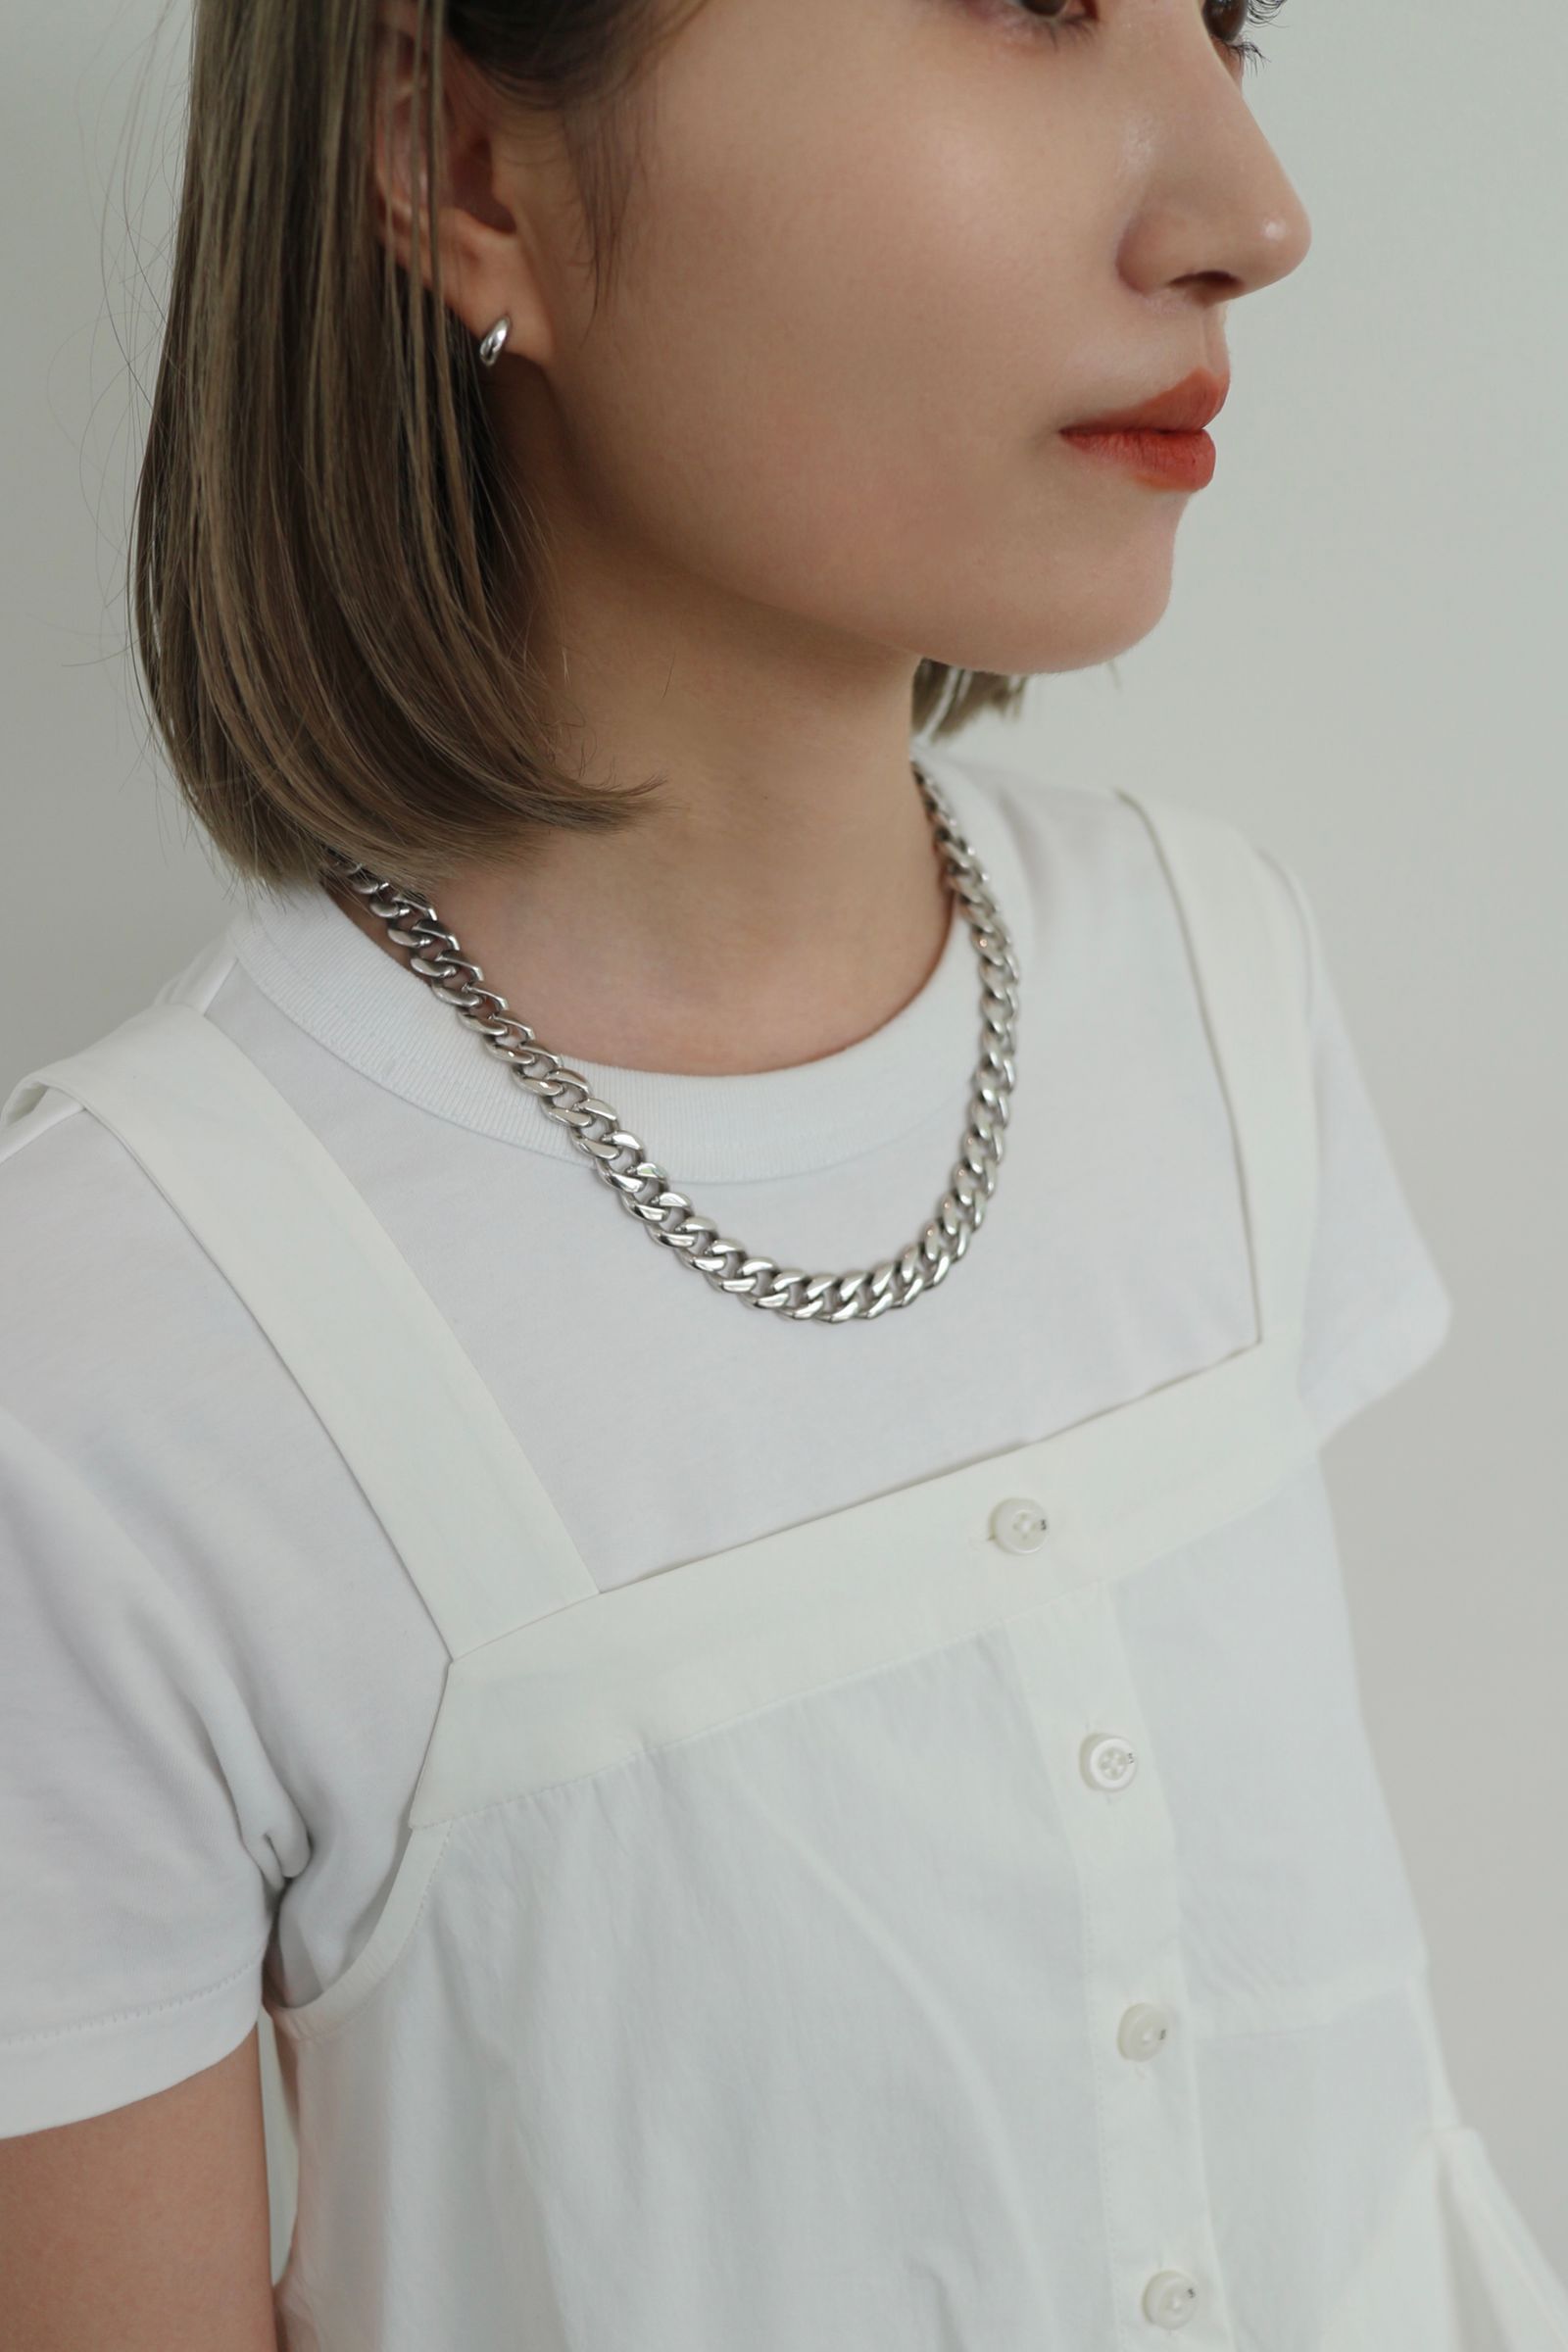 GYPPHY - CURB CHAIN NECKLACE / カーブ チェーン ネックレス STERLING